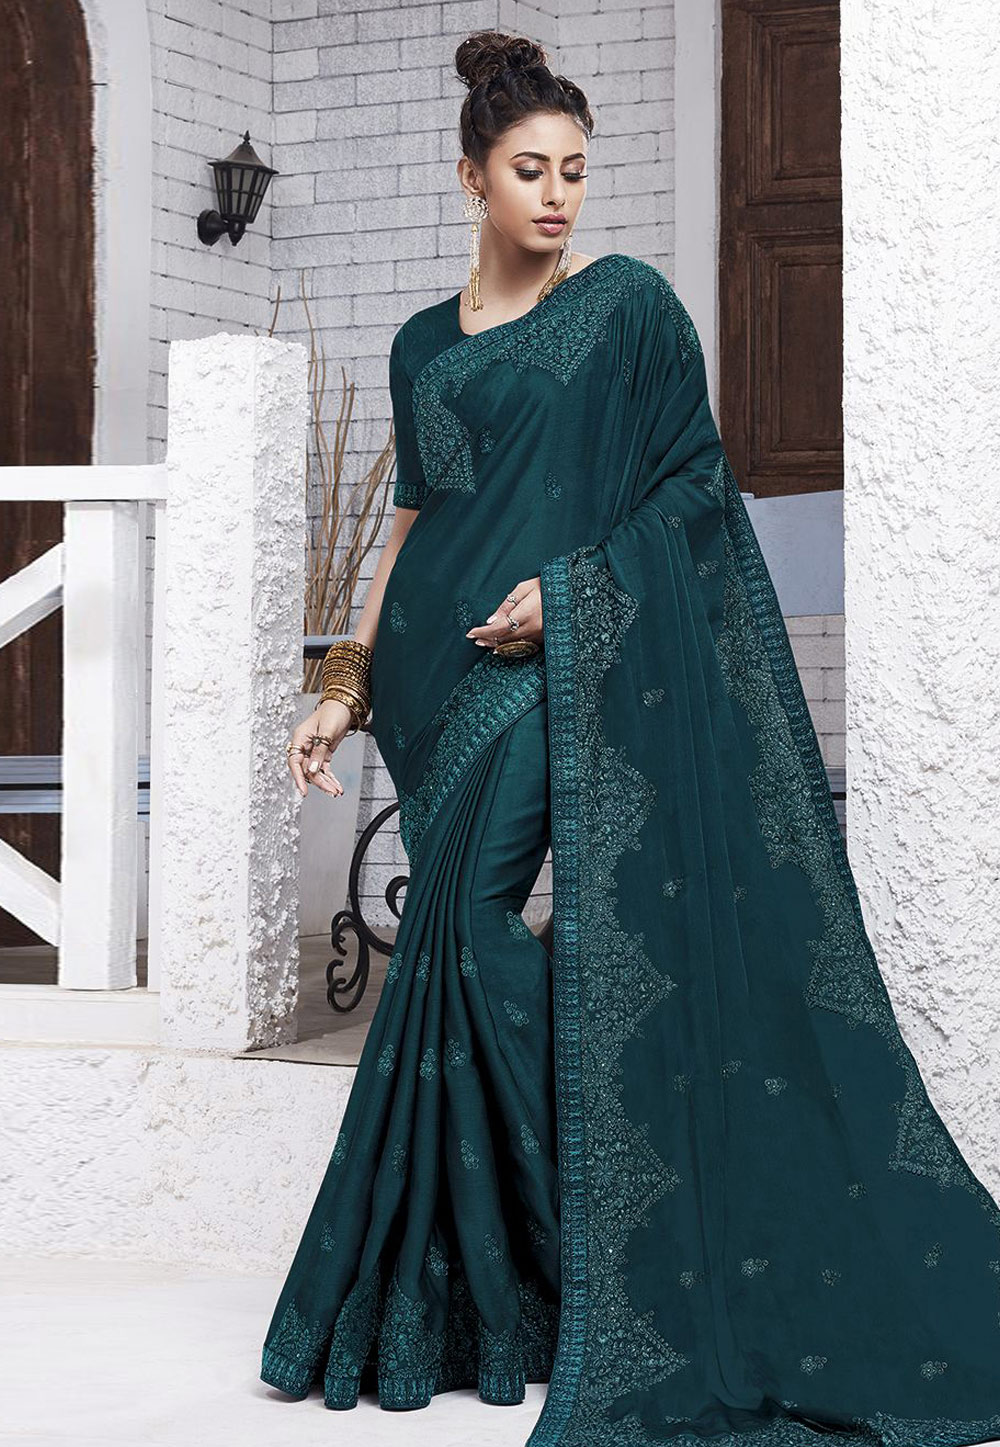 Teal Blue Chiffon Saree With Blouse 204558